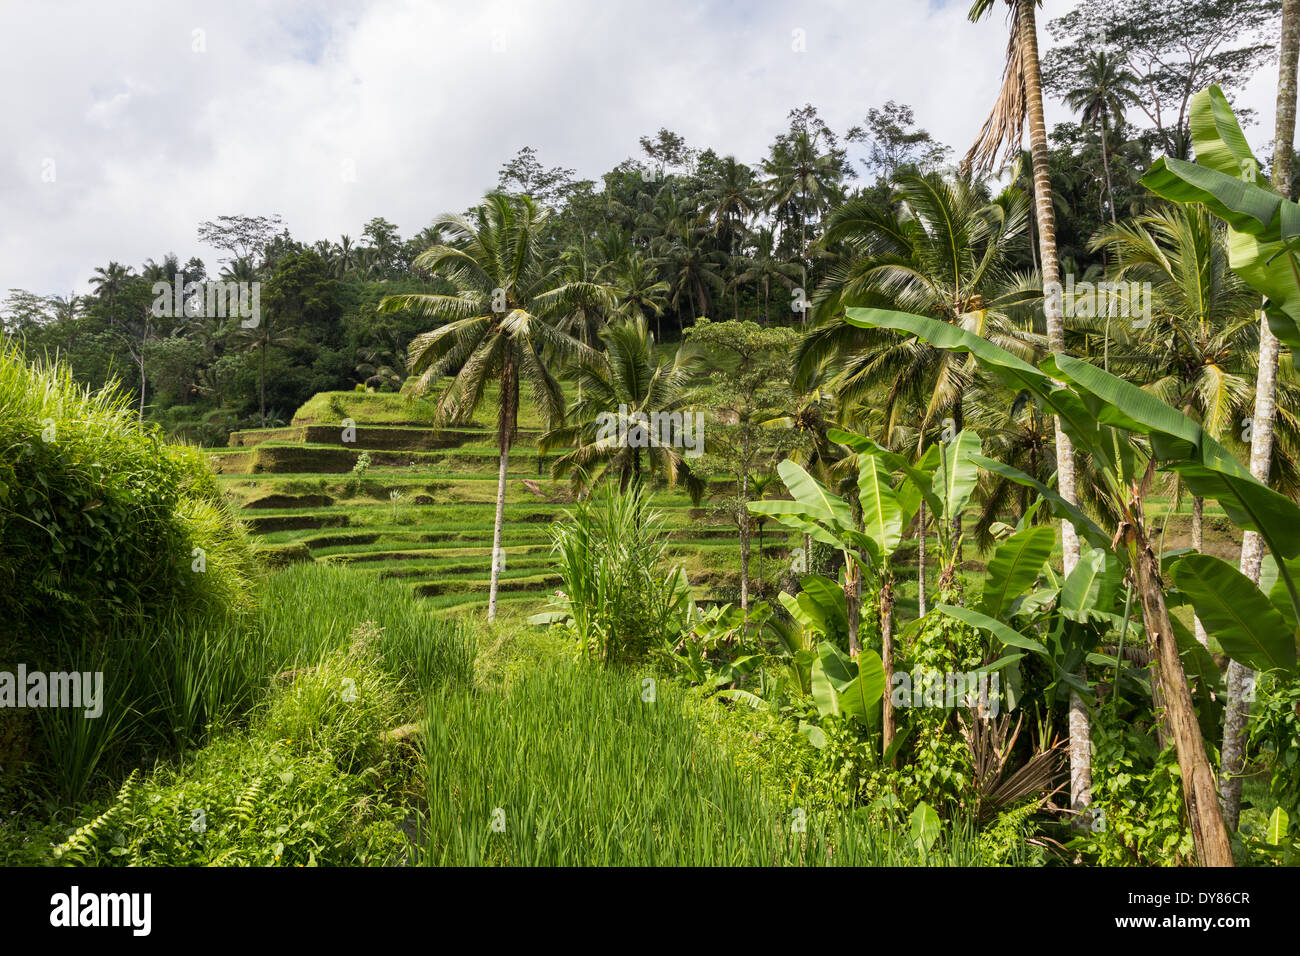 Tegalalang Rice Terrace is one of the famous tourist objects in Bali situated in Tegalalang Village, Bali, Indonesia. Stock Photo